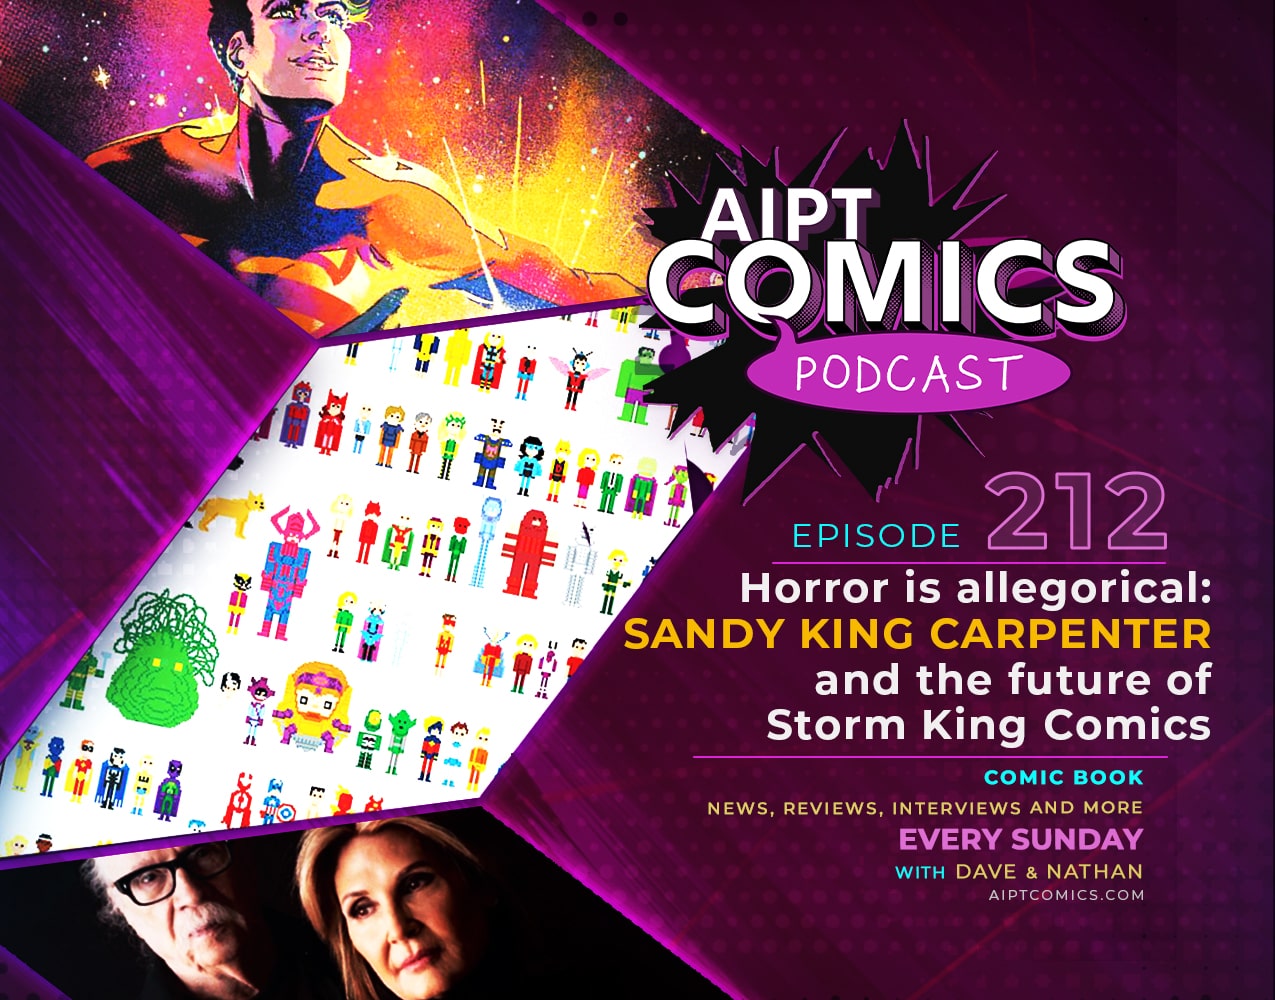 AIPT Comics Podcast episode 212: Horror is allegorical: Sandy King Carpenter and the future of Storm King Comics